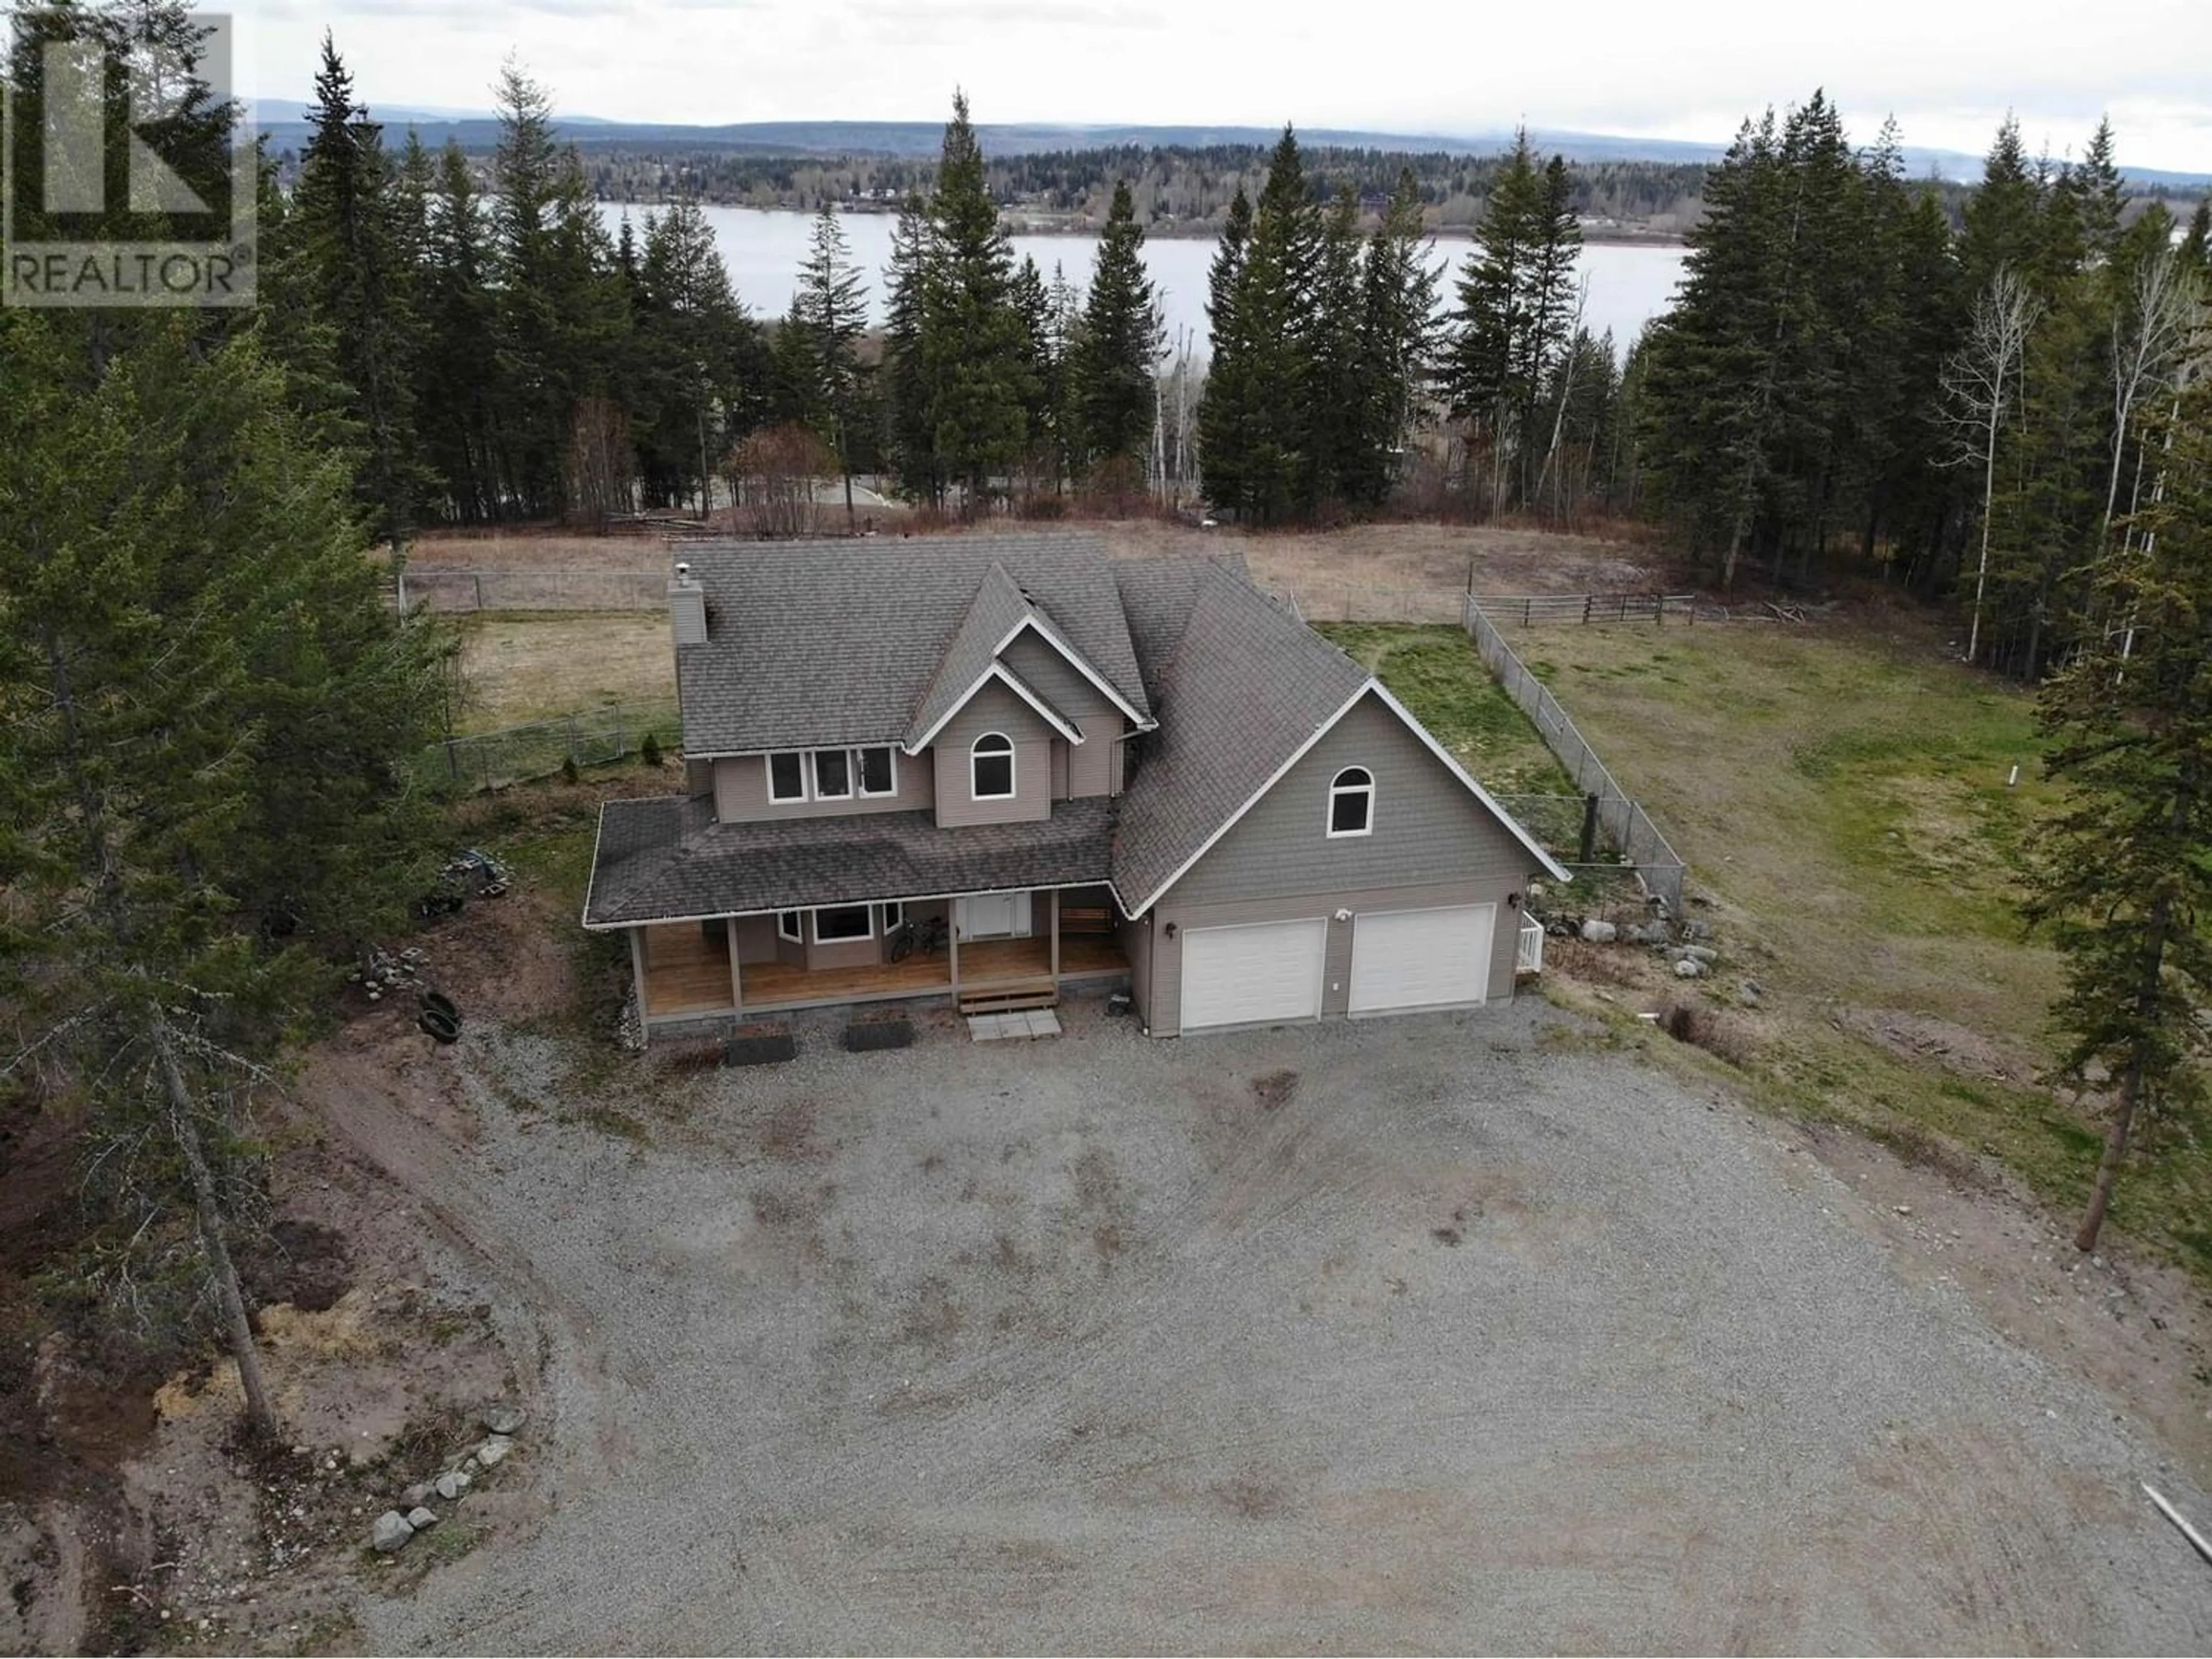 Cottage for 1551 VIEW DRIVE, Quesnel British Columbia V2J6G1